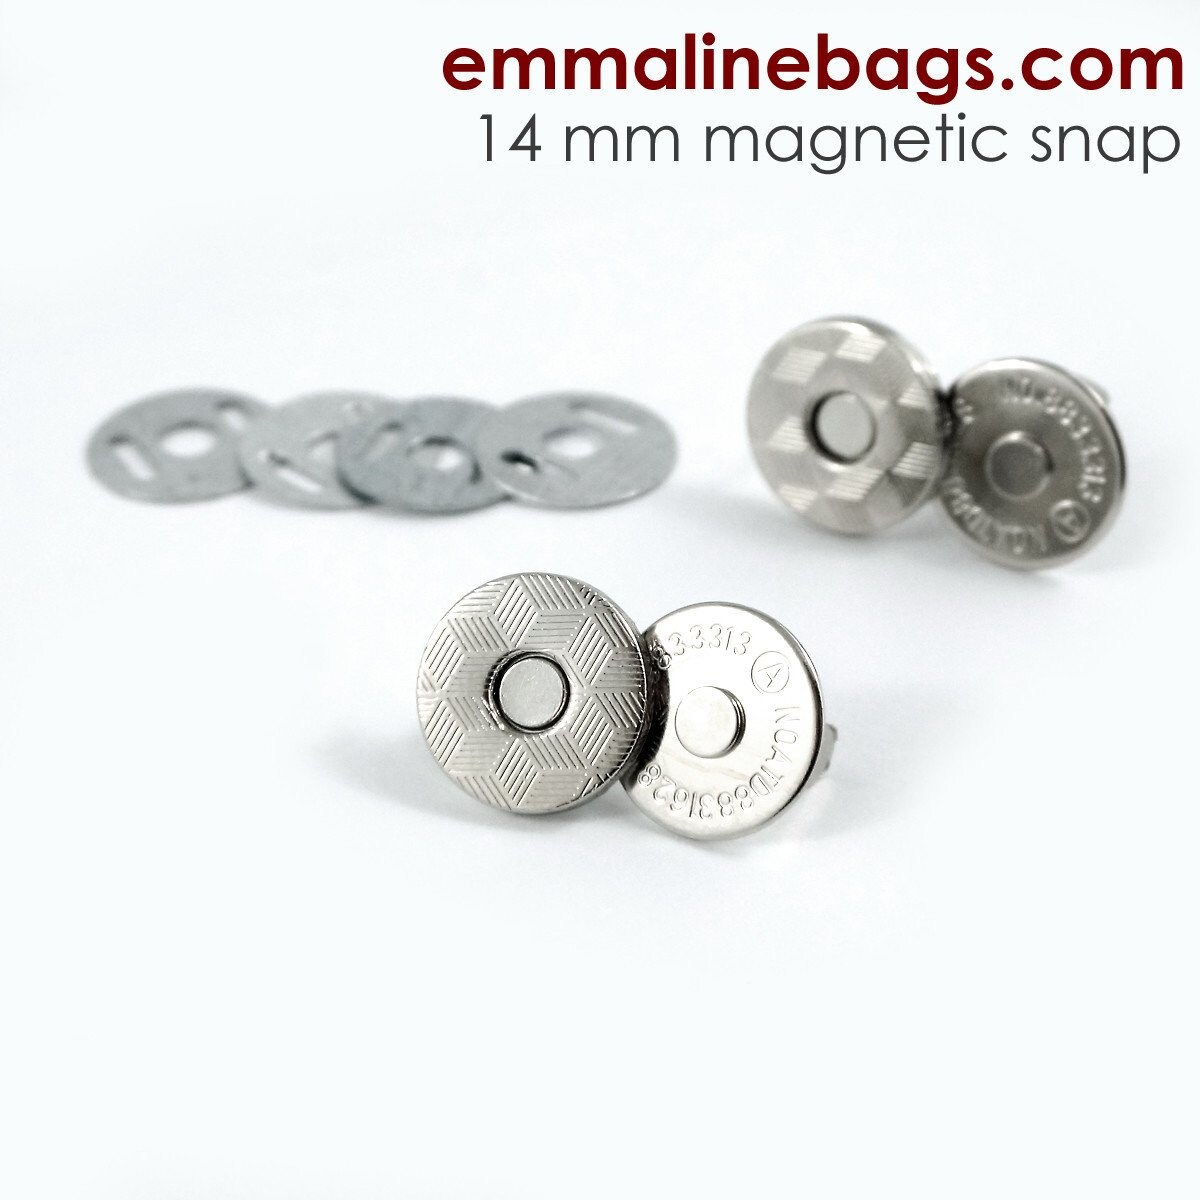 Magnetic Snap Closures: 9/16 (14 mm) SLIM in Antique Brass – Emmaline Bags  Inc.